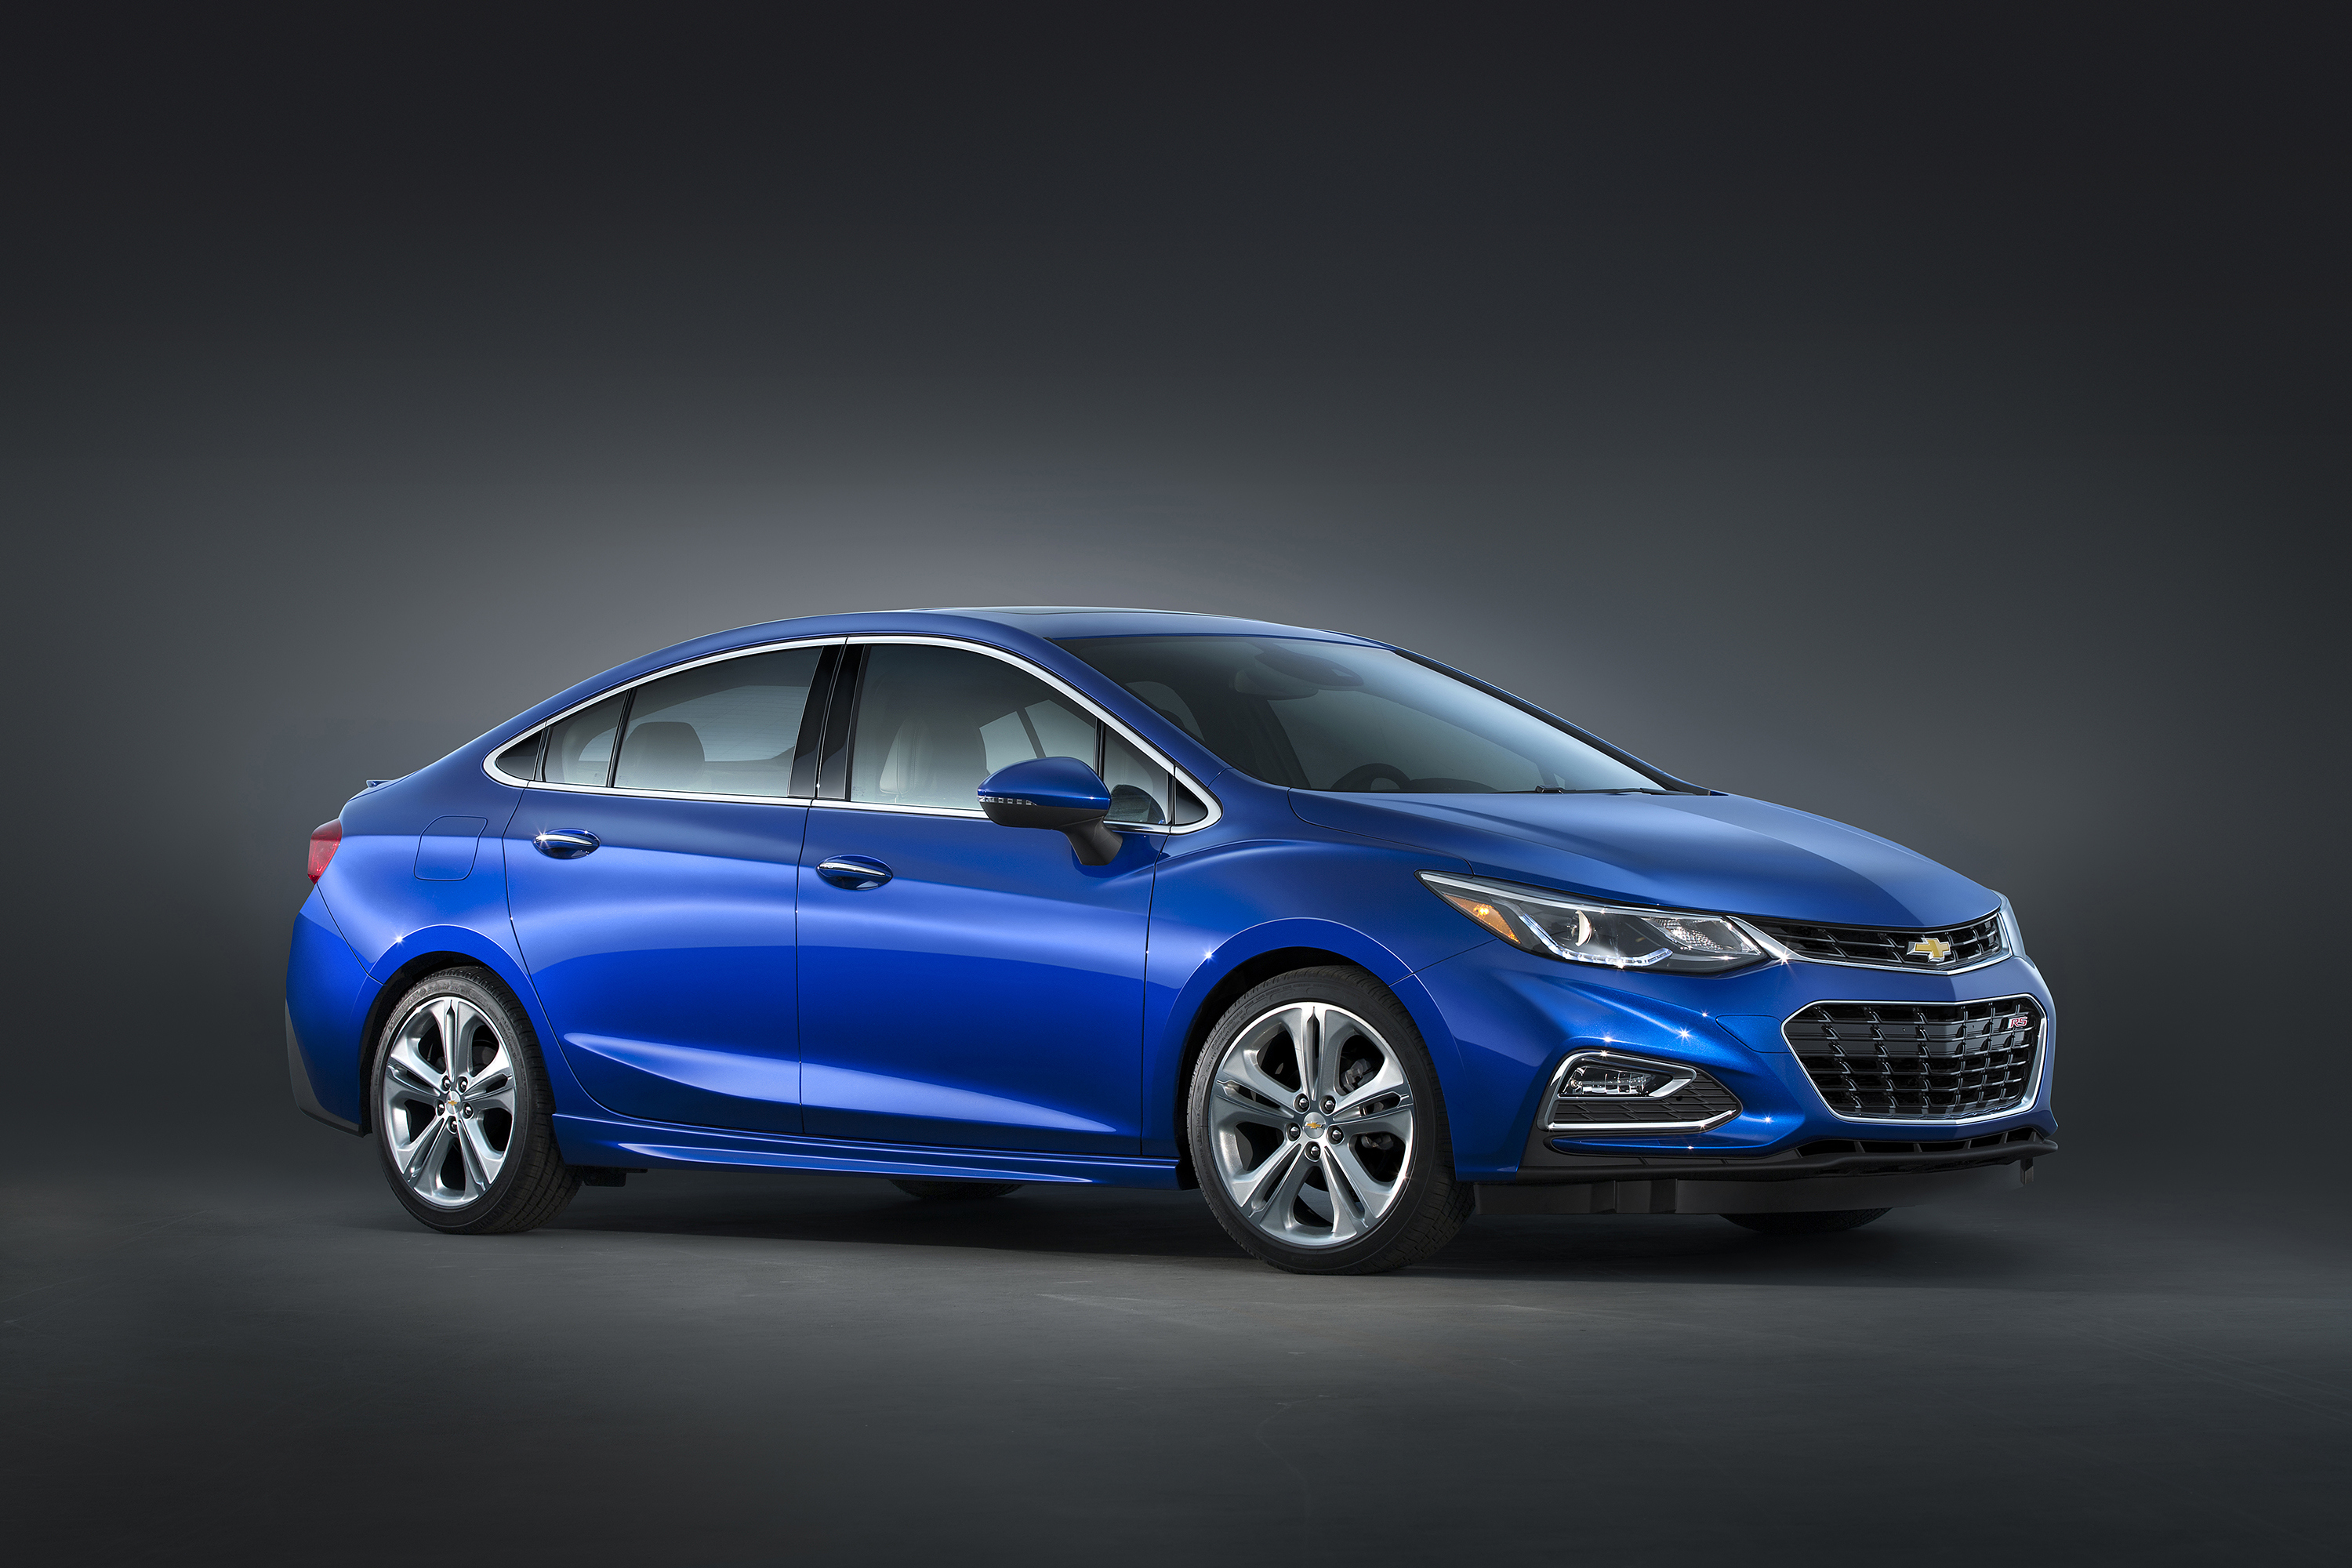 The 2016 Chevrolet Cruze. (The 2016 Chevrolet Cruze – a larger, lighter, more efficient and more sophisticated evolution of the brand’s best-selling global car.)